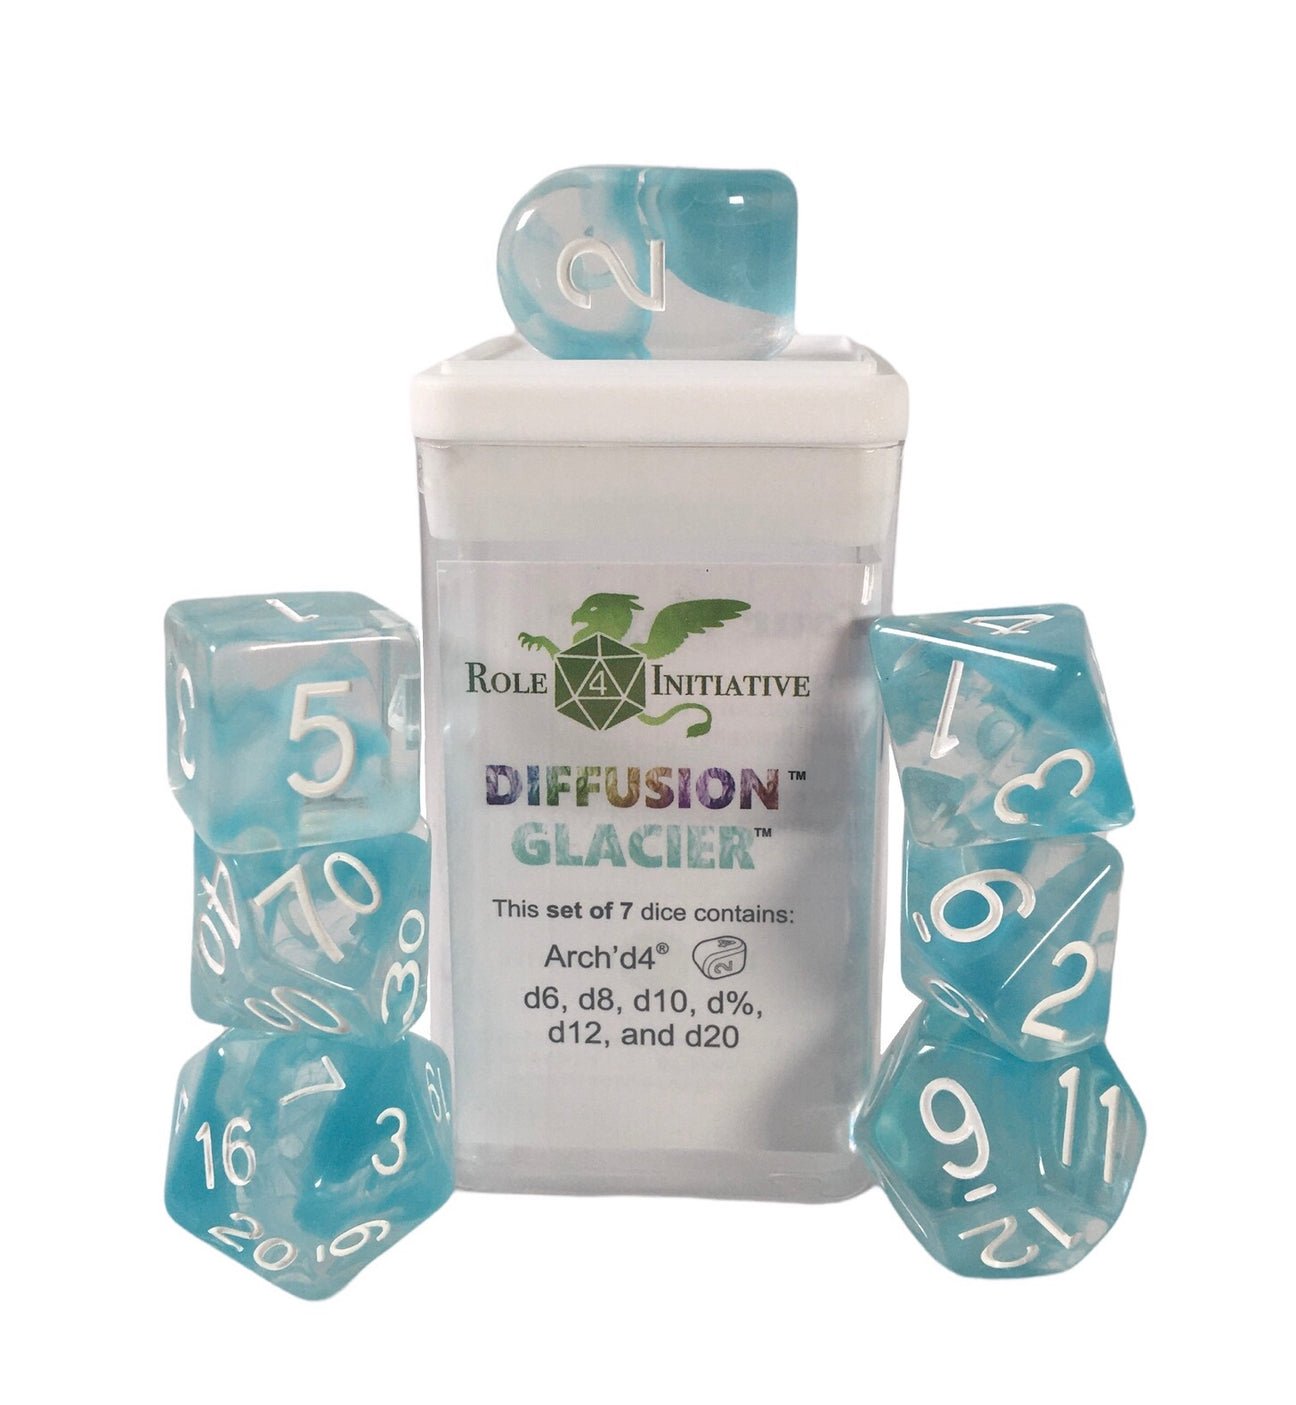 Glacier Diffusion Dice - 7 dice set (with Arch’d4™) - The Fourth Place